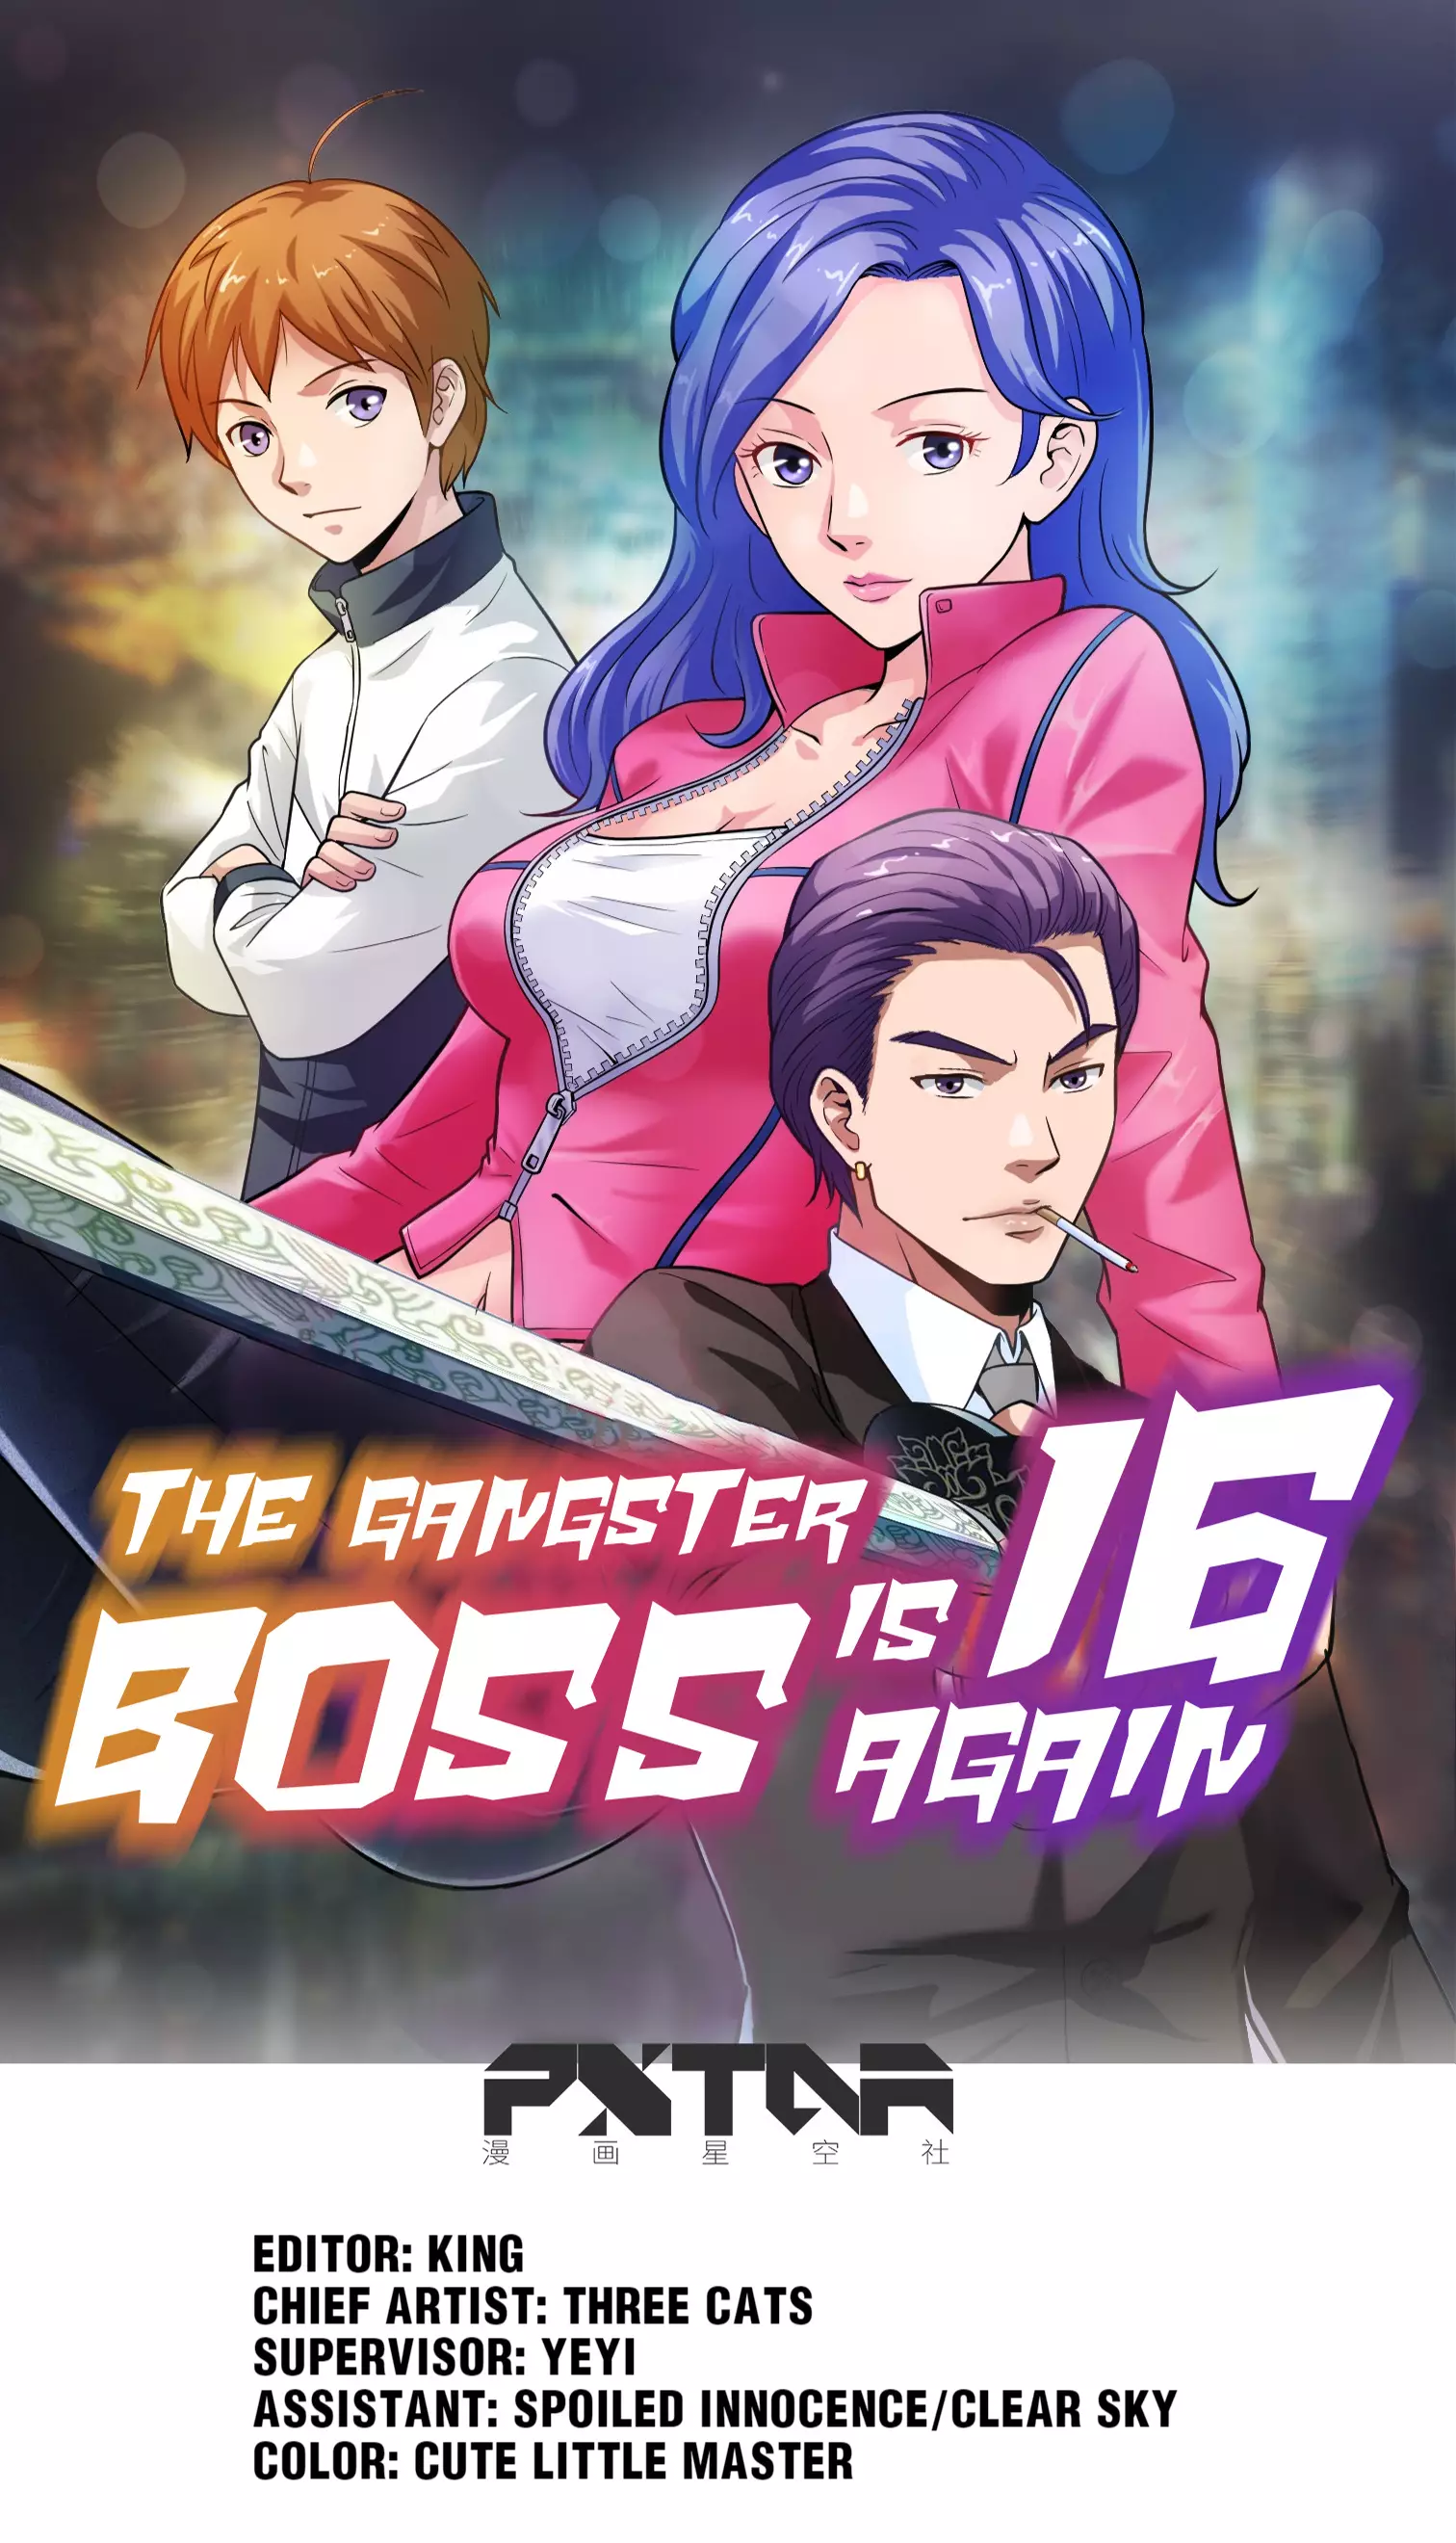 The Gangster Boss Is 16 Again - 49.1 page 1-fc3511e5